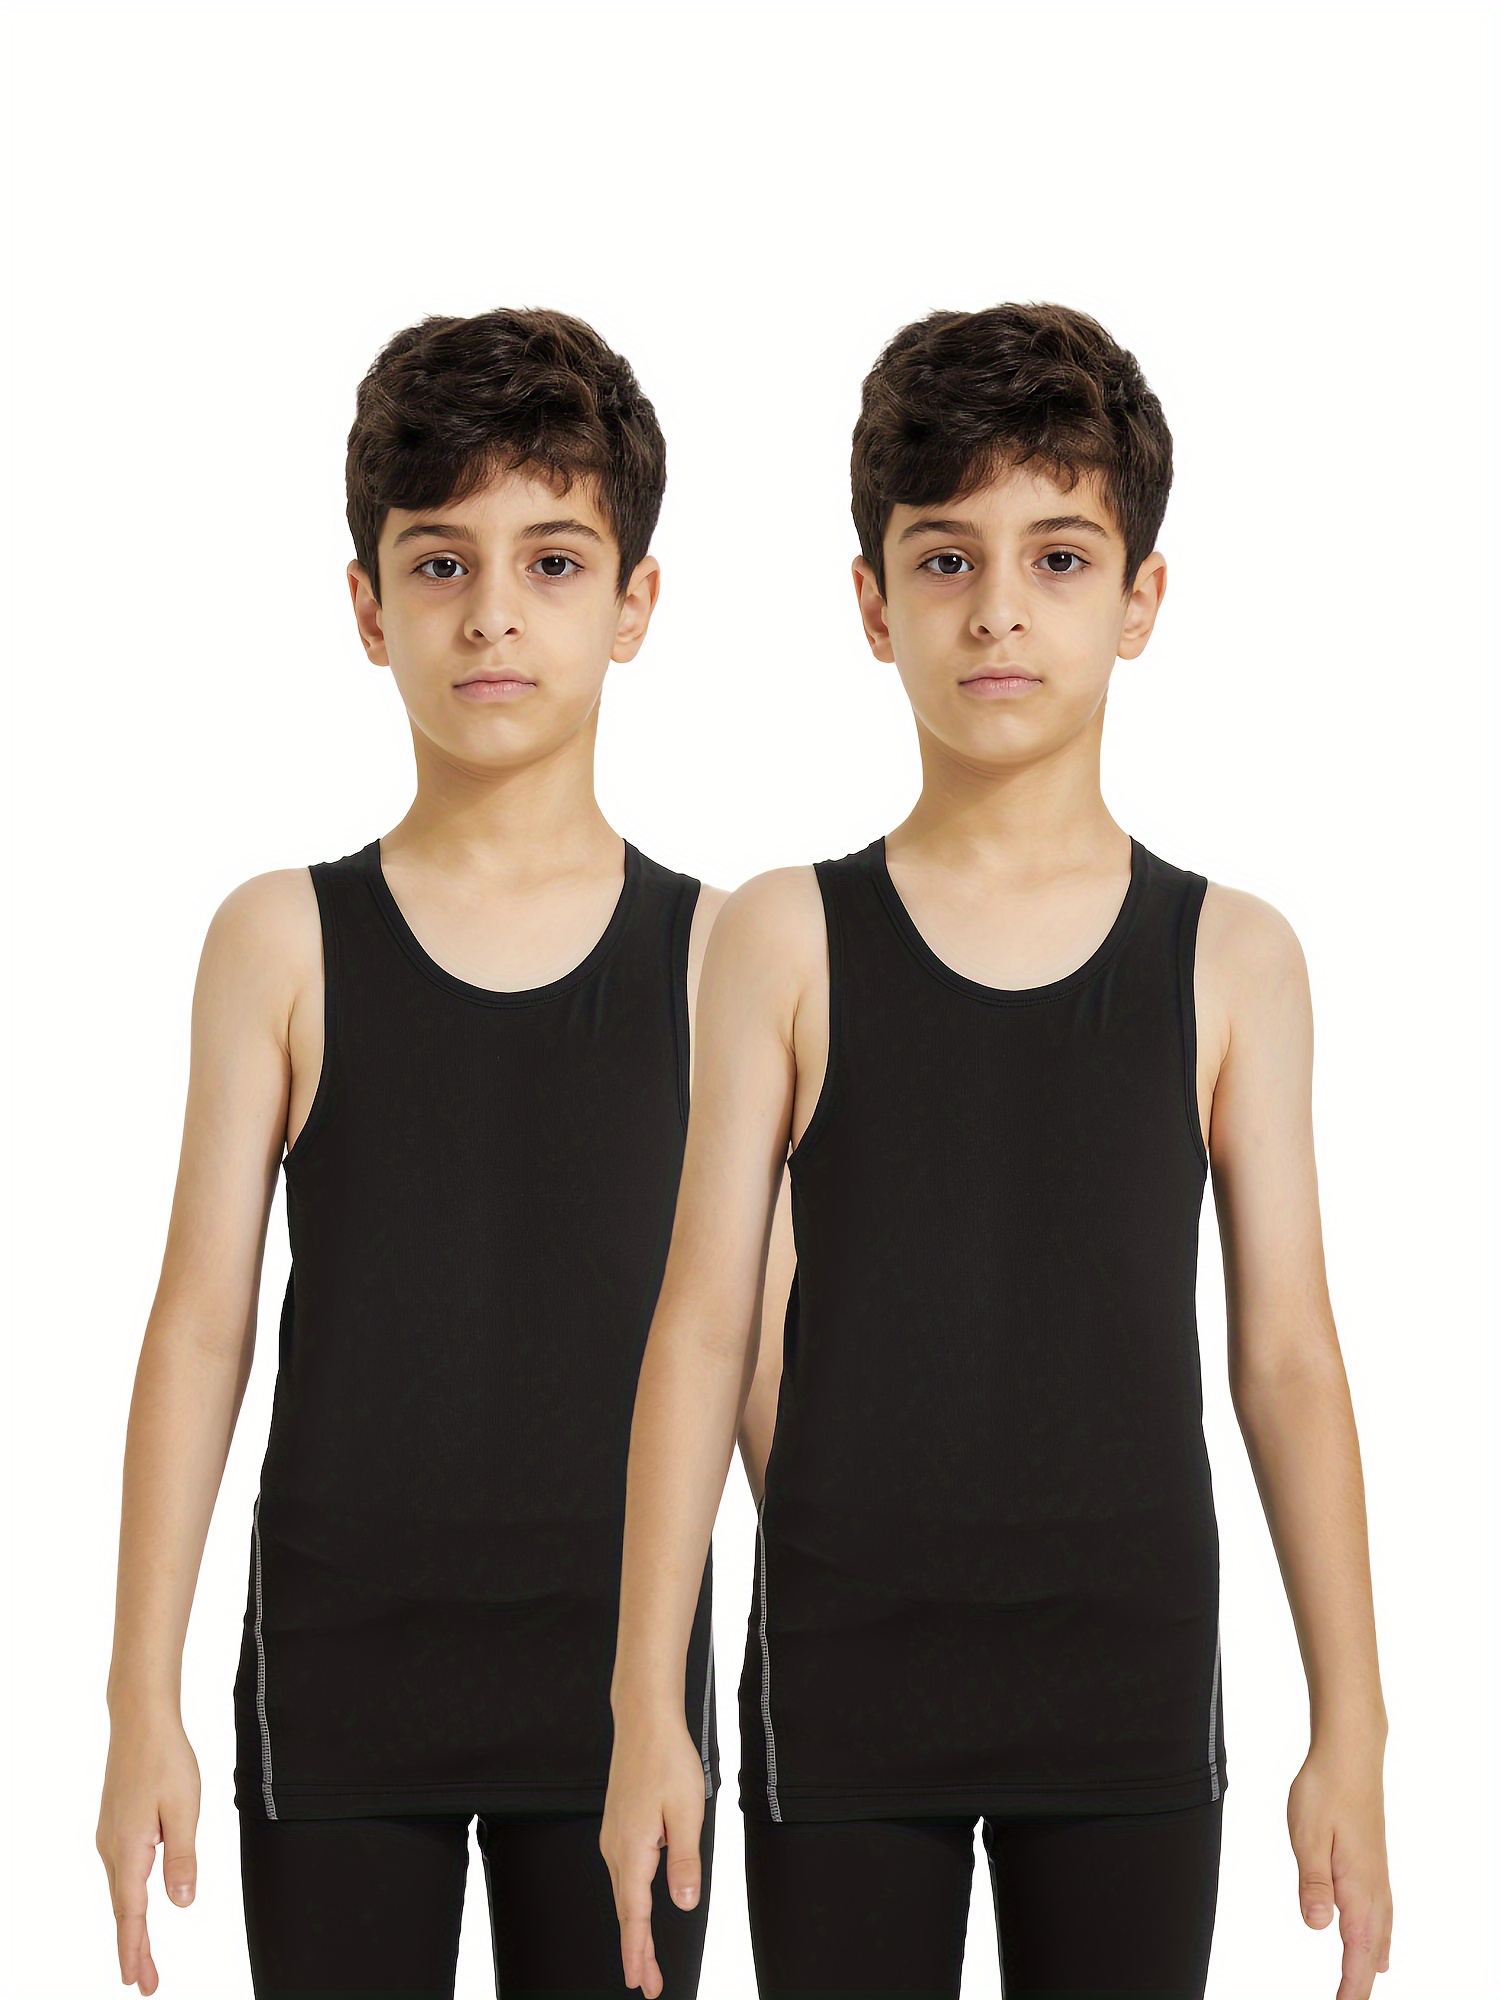 Youth Boys Girls Compression Tank Tops Athletic Sleeveless Shirt